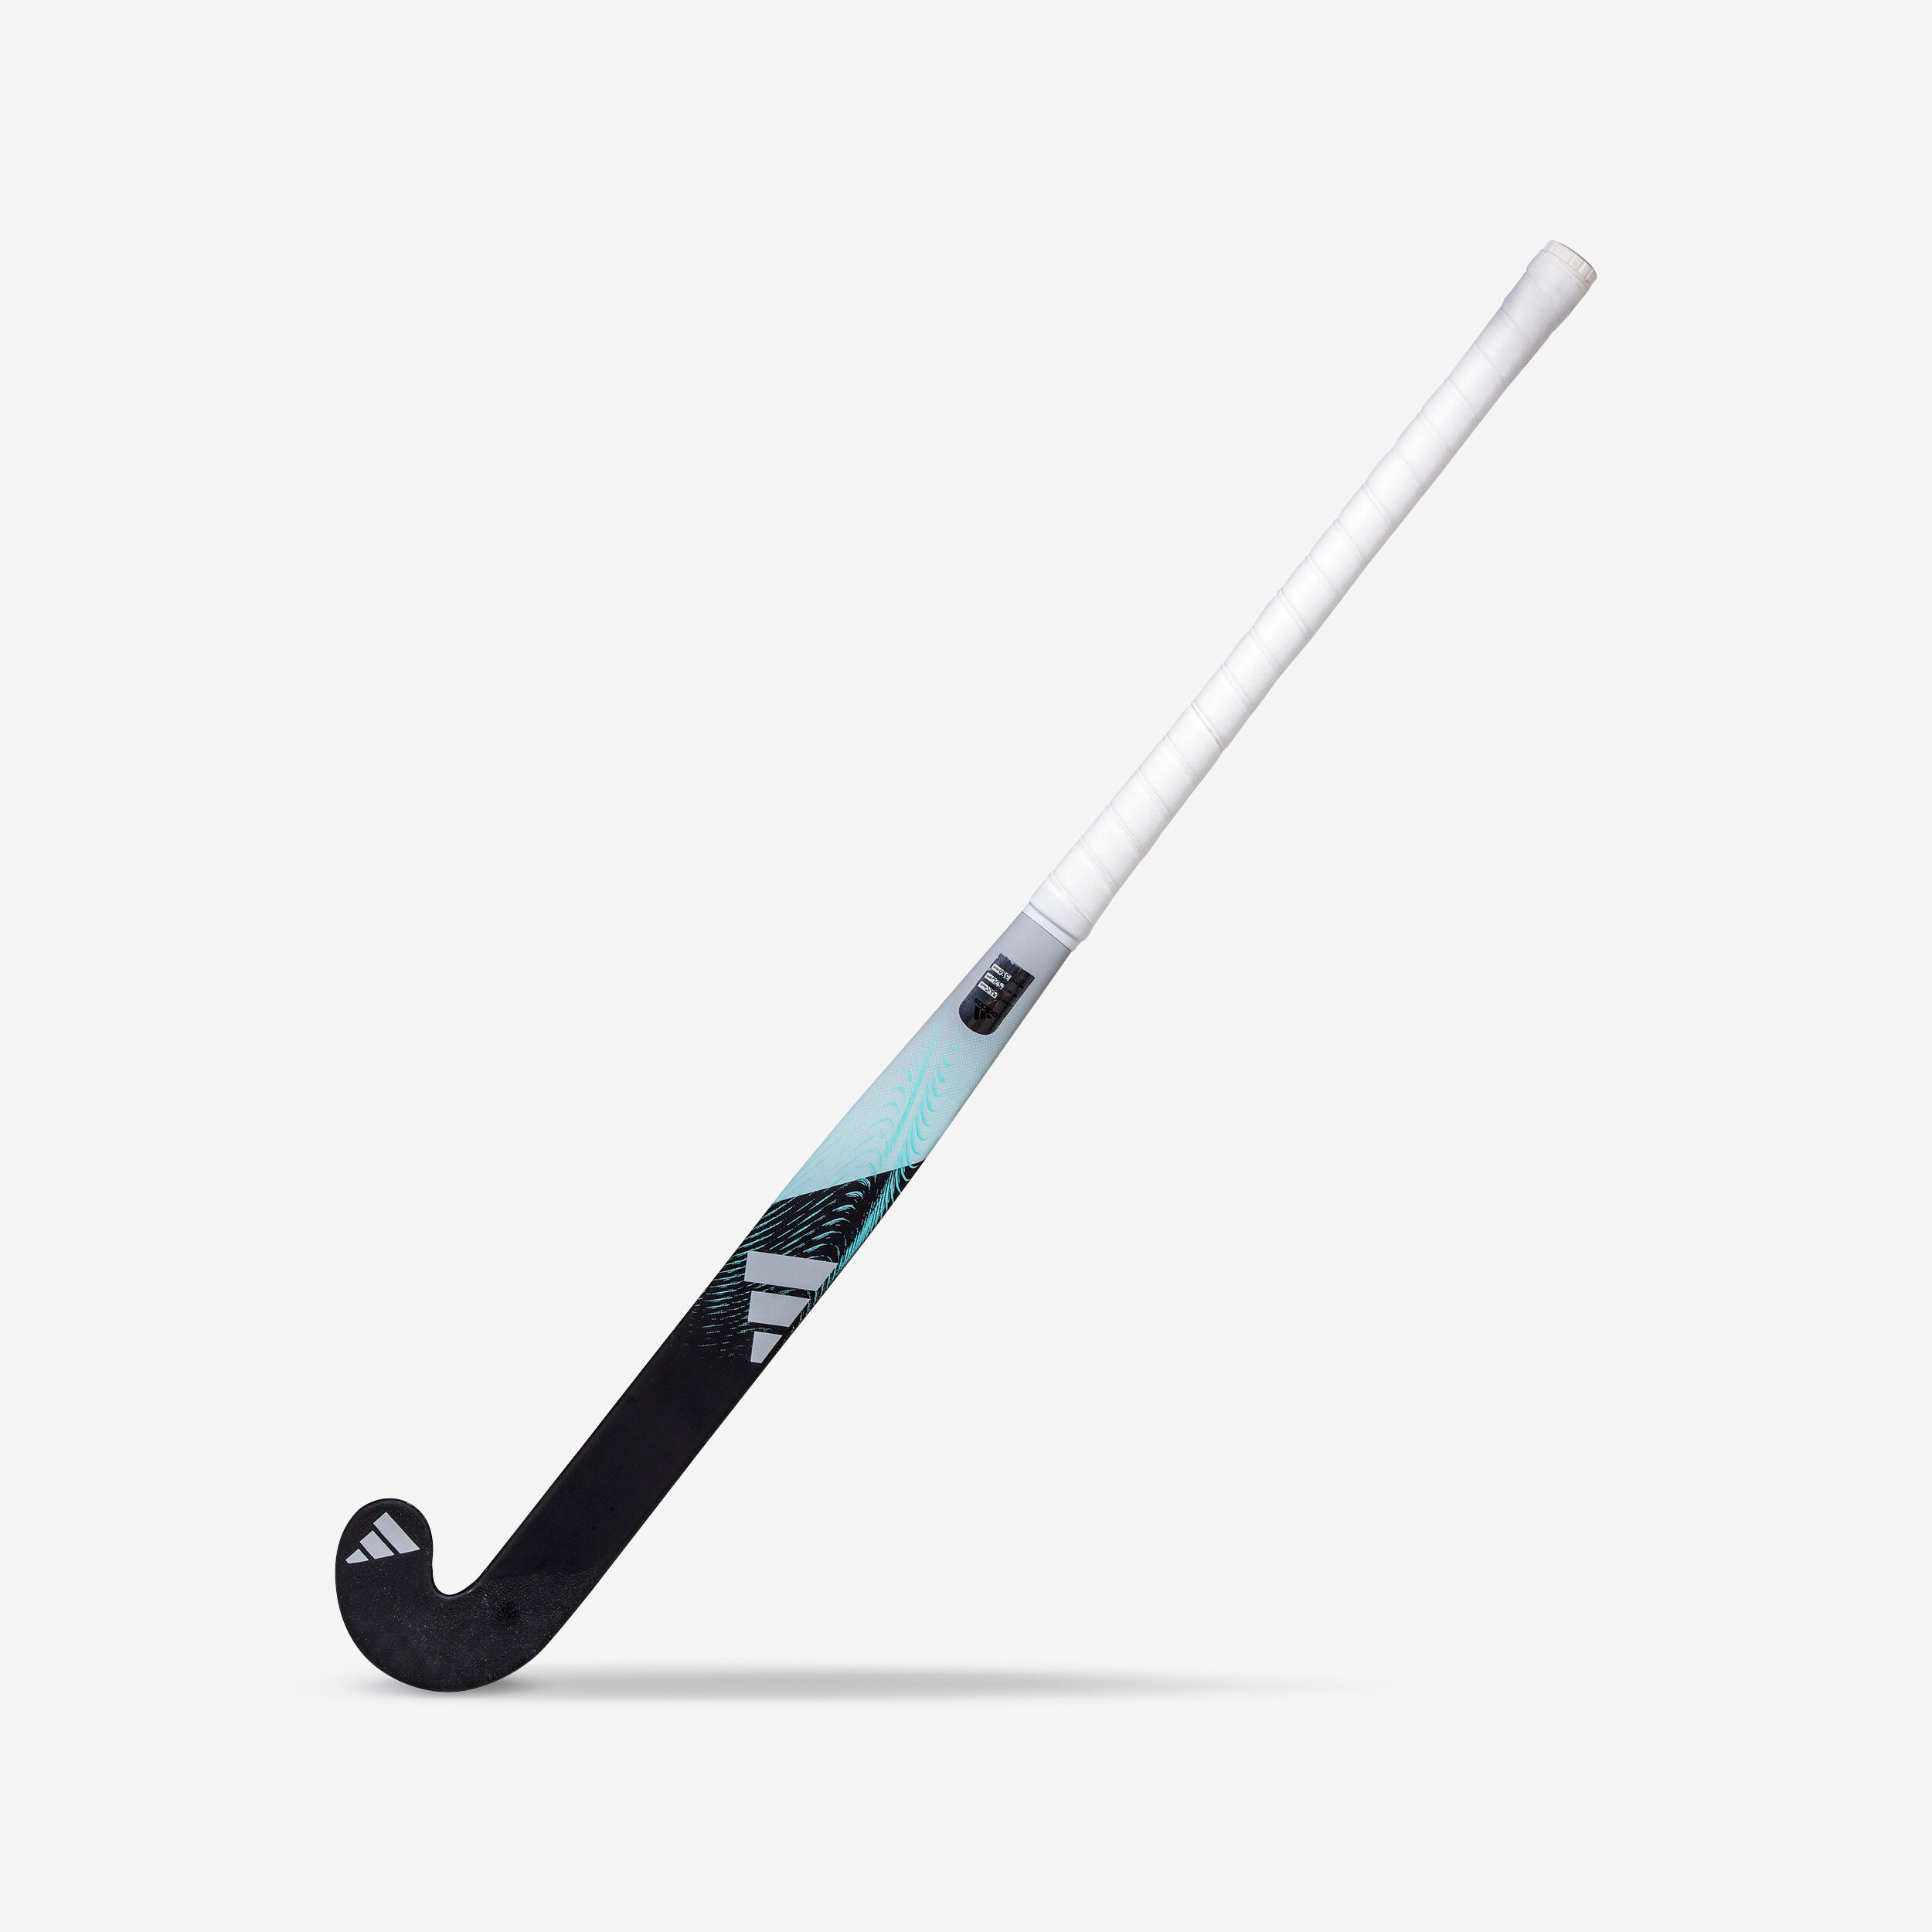 Adult Intermediate 20% Carbon Mid Bow Field Hockey Stick Fabela .7 - Black/Turquoise 7/12